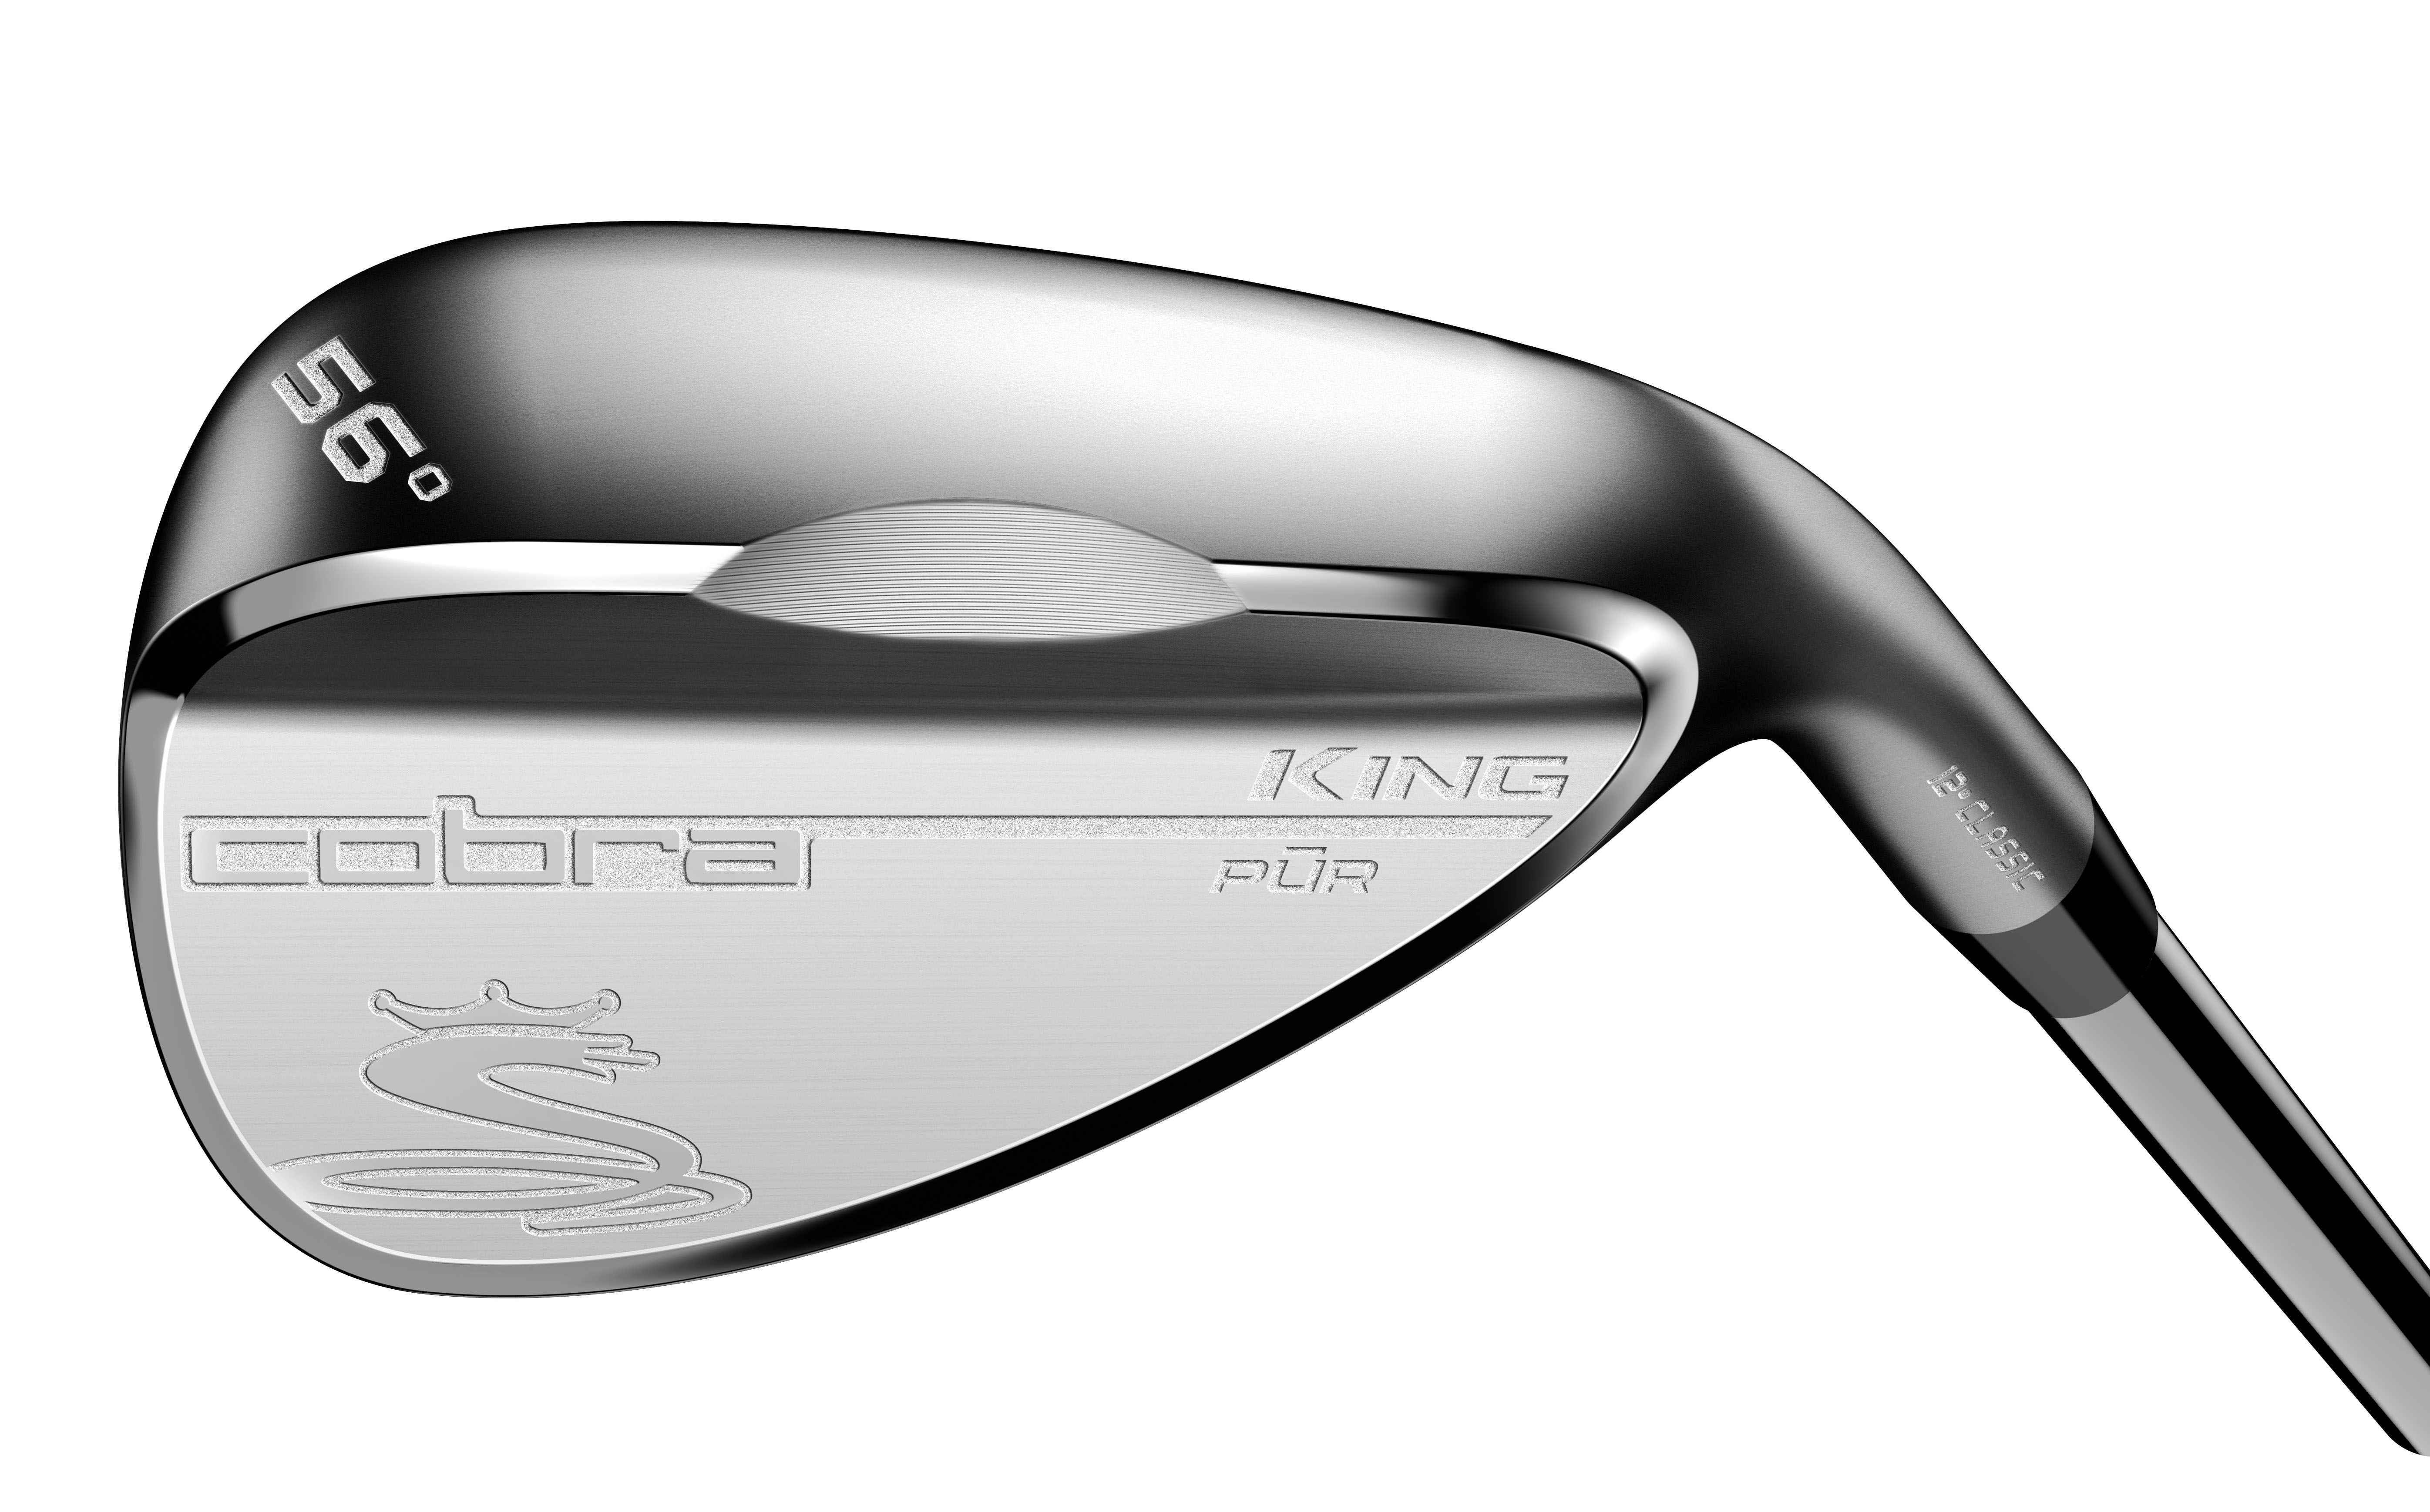 Burger puberteit regen King PUR wedges from Cobra use un-chromed raw finish to uncomplicate spin  and feel | This is the Loop | Golf Digest